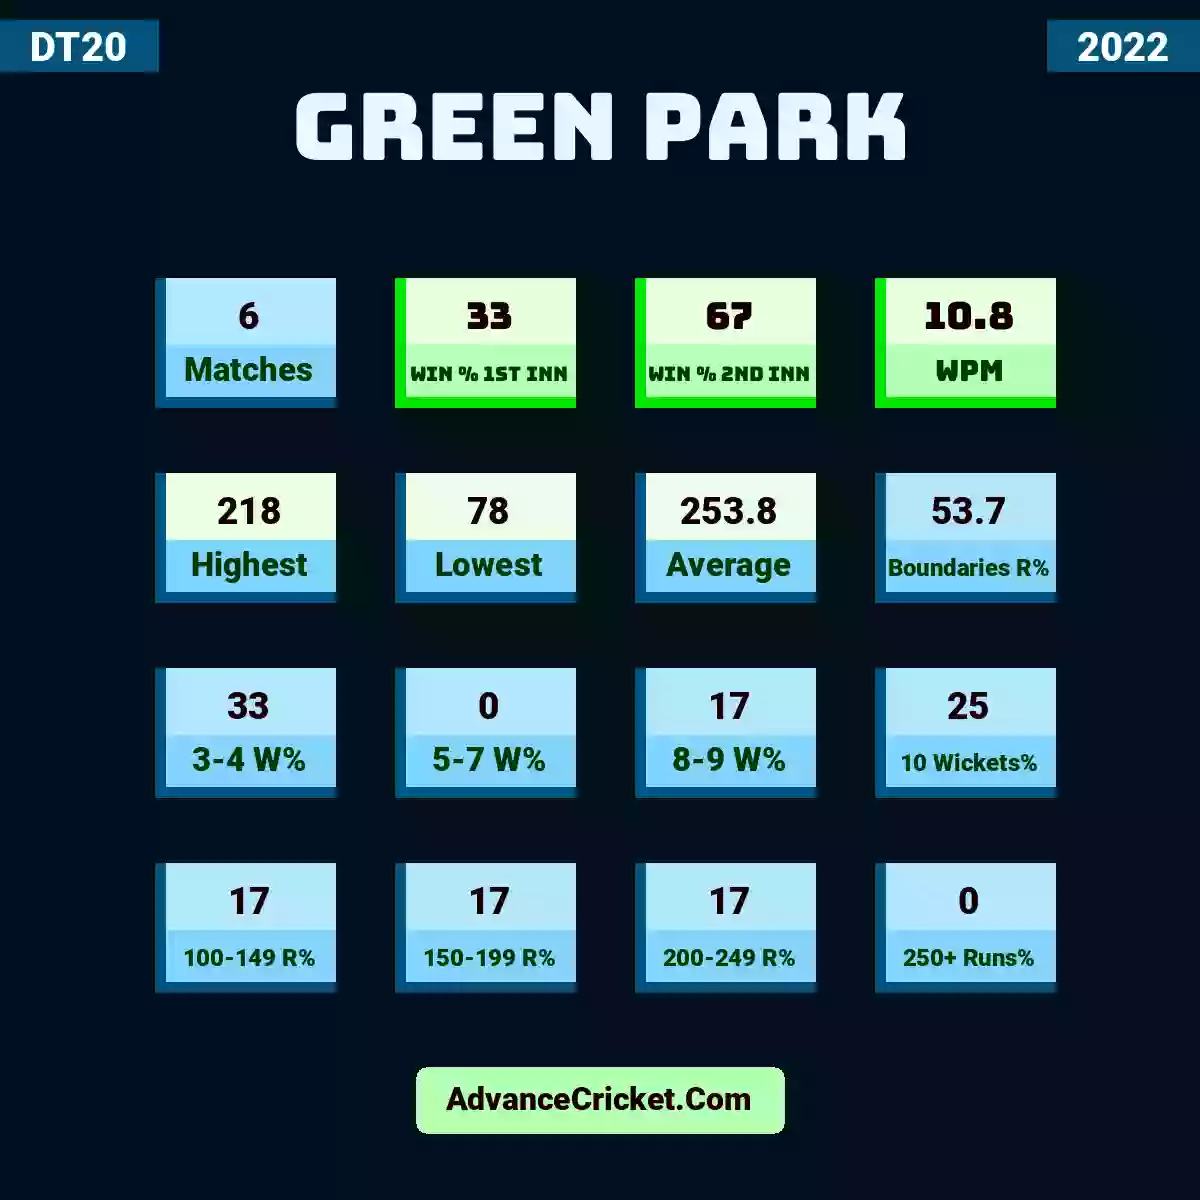 Image showing Green Park with Matches: 6, Win % 1st Inn: 33, Win % 2nd Inn: 67, WPM: 10.8, Highest: 218, Lowest: 78, Average: 253.8, Boundaries R%: 53.7, 3-4 W%: 33, 5-7 W%: 0, 8-9 W%: 17, 10 Wickets%: 25, 100-149 R%: 17, 150-199 R%: 17, 200-249 R%: 17, 250+ Runs%: 0.